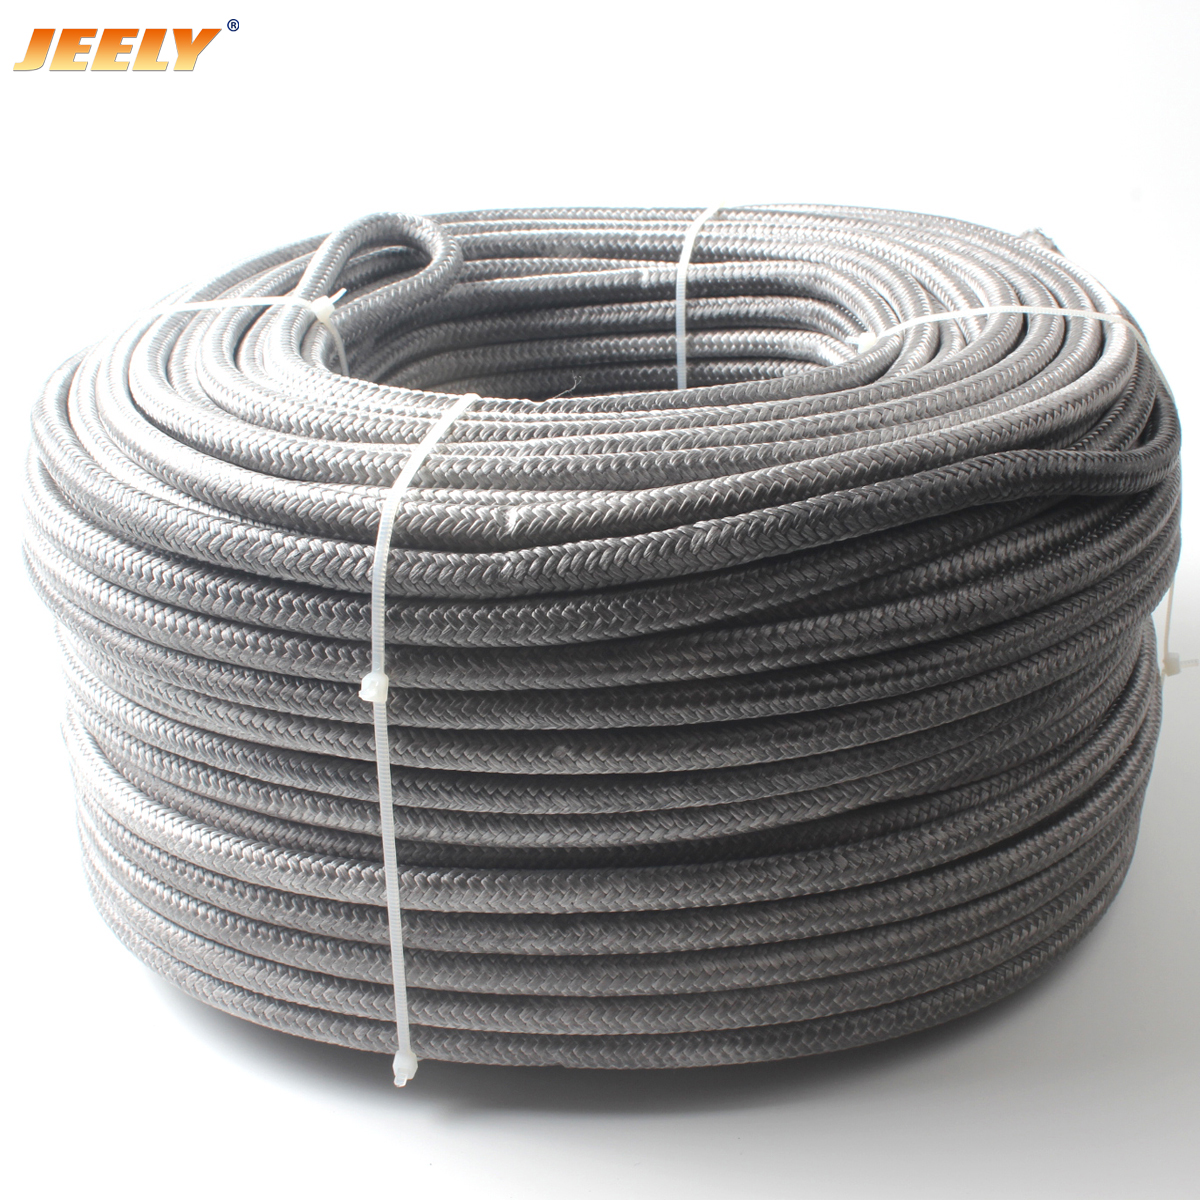 11mm 100m UHMWPE Core with UHMWPE Jacket Sailboat Winch Spectra Sheathed Tow Rope